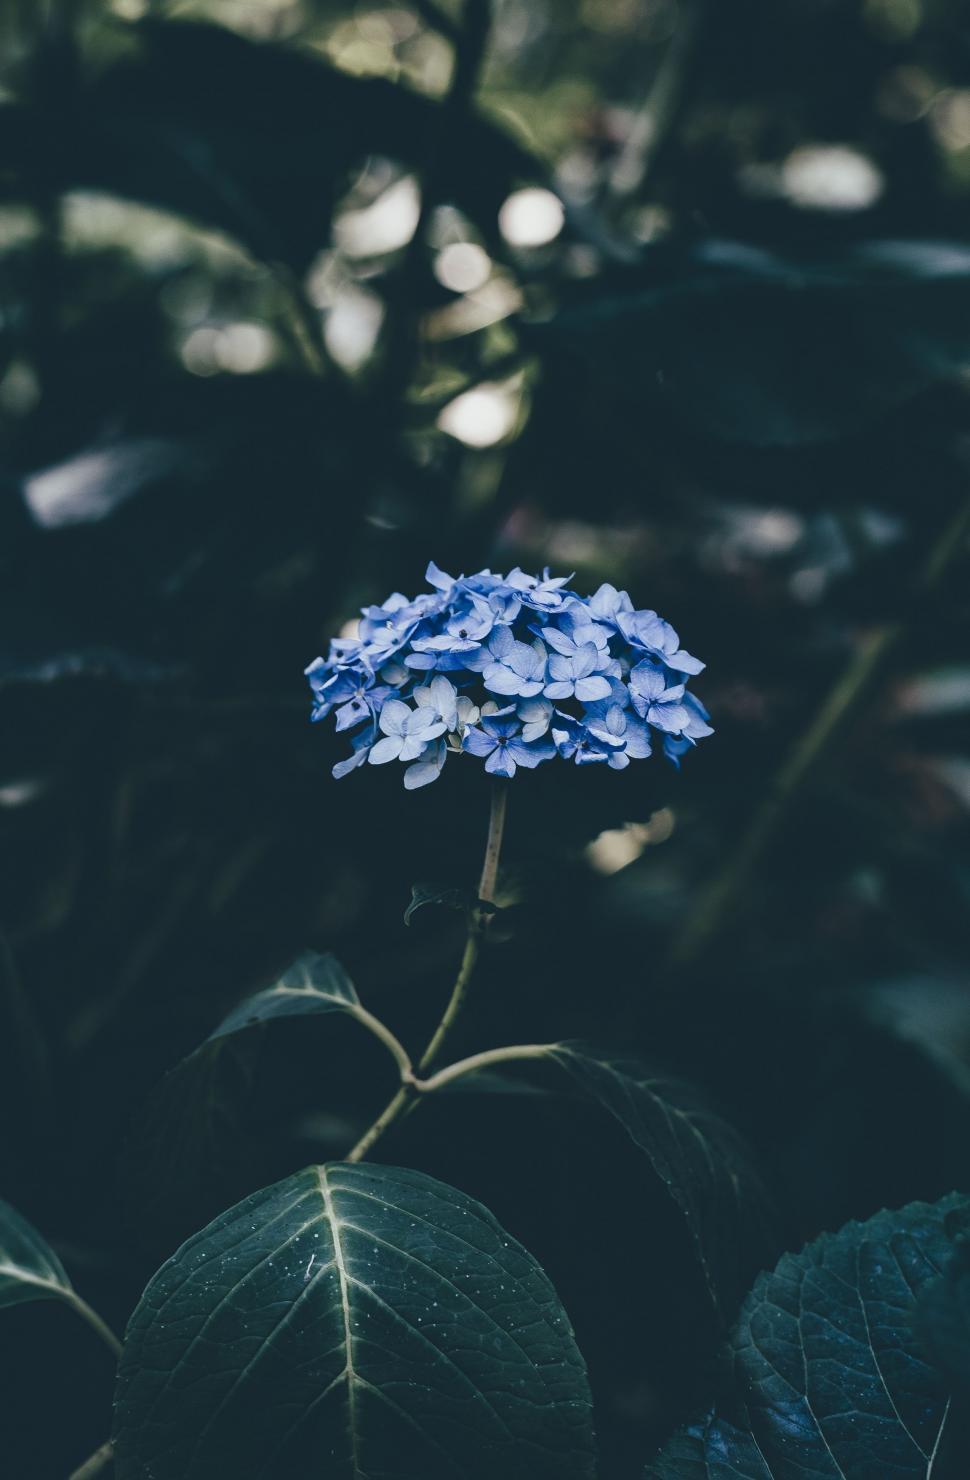 Free Image of Bunch of blue flowers 